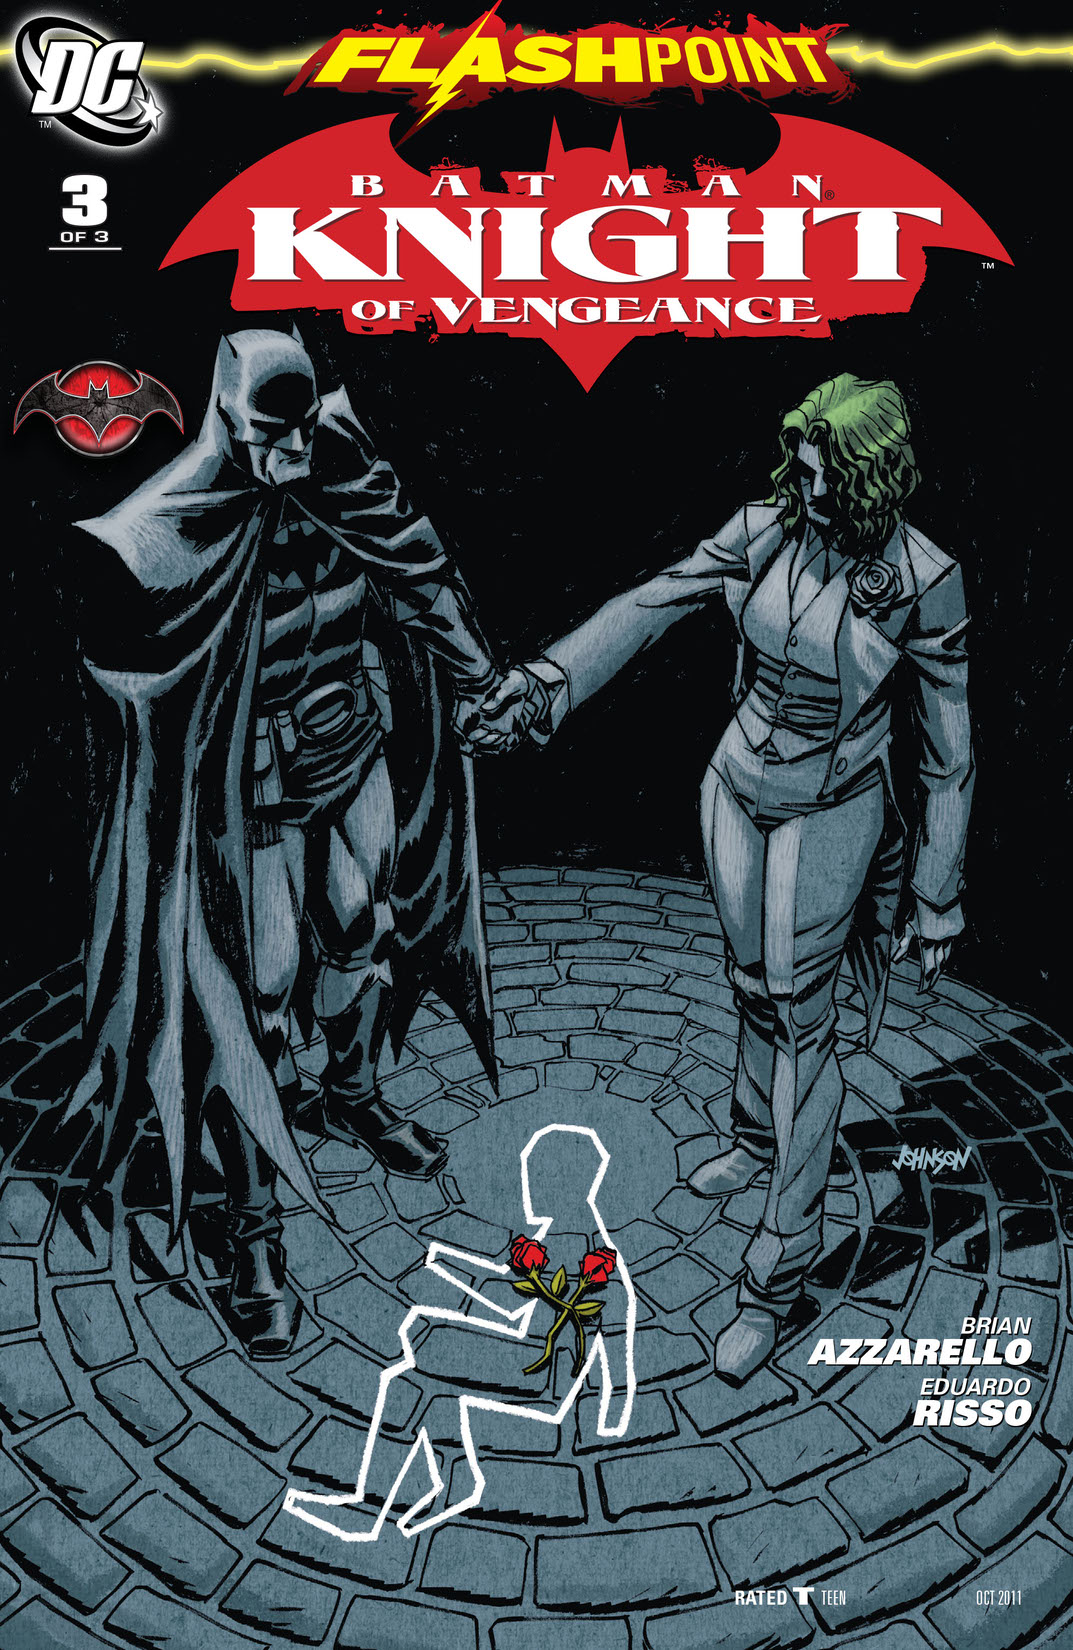 Flashpoint: Batman Knight of Vengeance #3 preview images